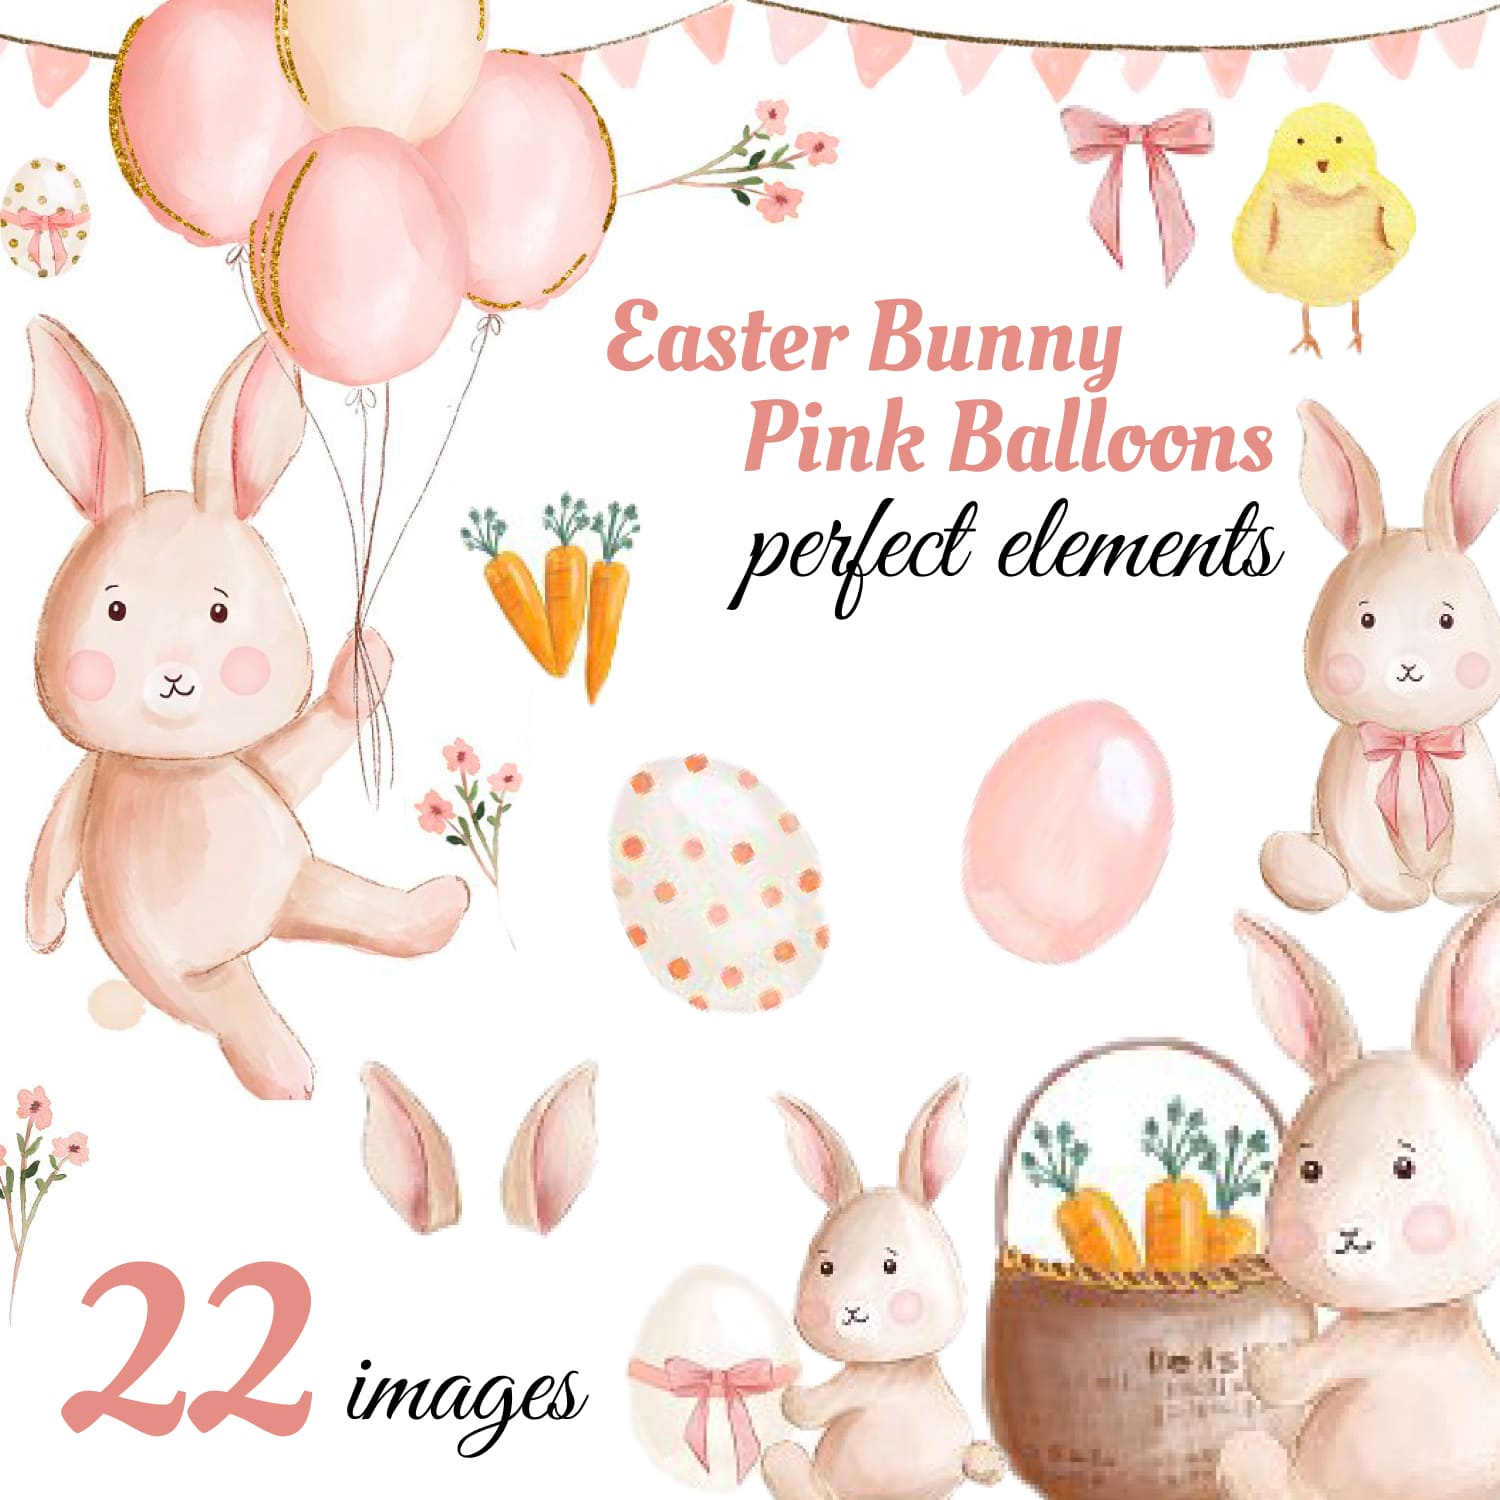 Easter Bunny Pink Balloons Clipart.